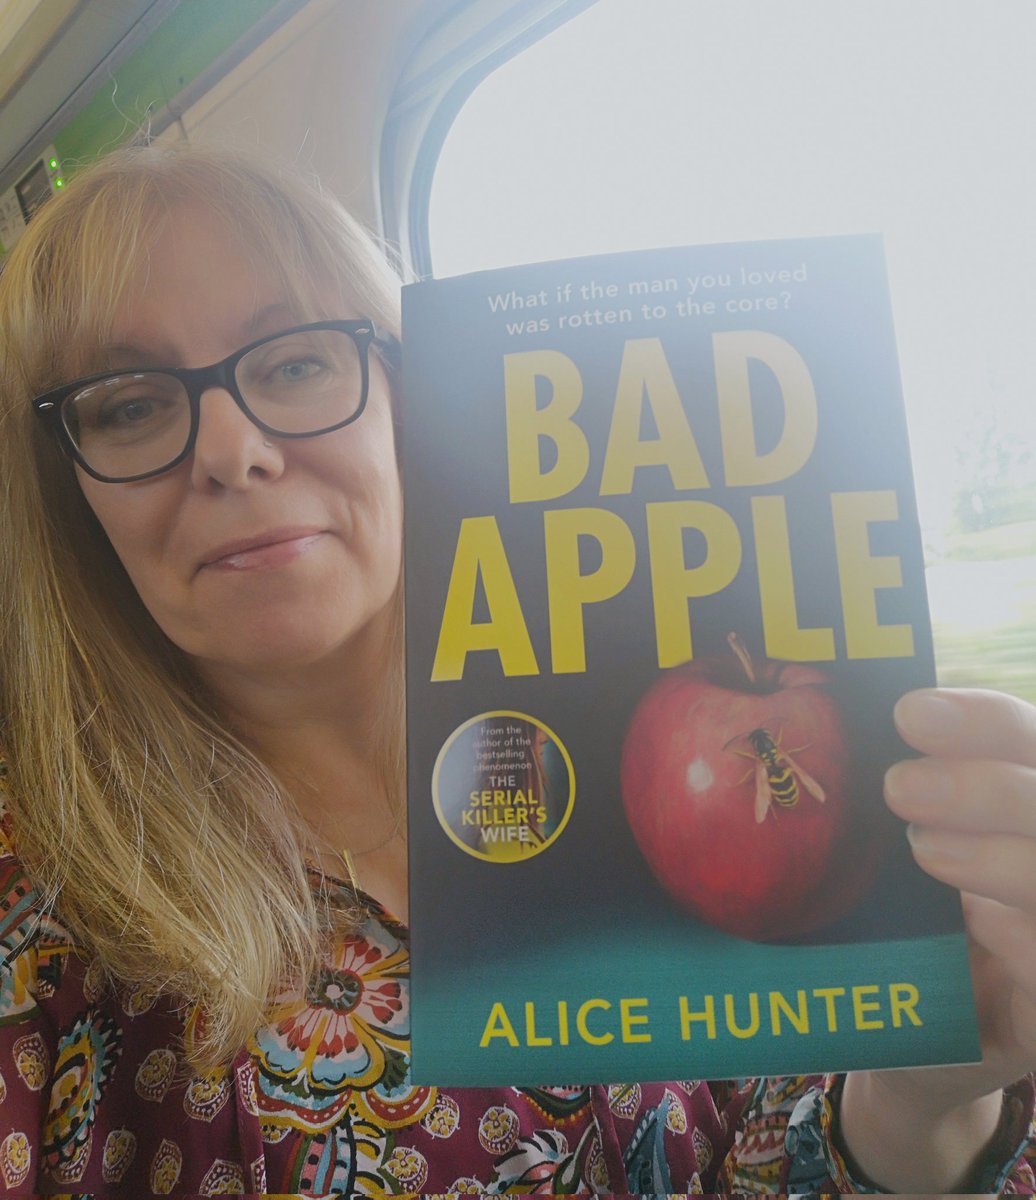 *Random comp*! It's publication day for #BadApple 🎉 I'm currently on the train to #Bristol. If you see me in and around #Crimefest this weekend, come say hi! And if you correctly tell me the OPENING LINE to Bad Apple, I'll give you this signed edition #Free!